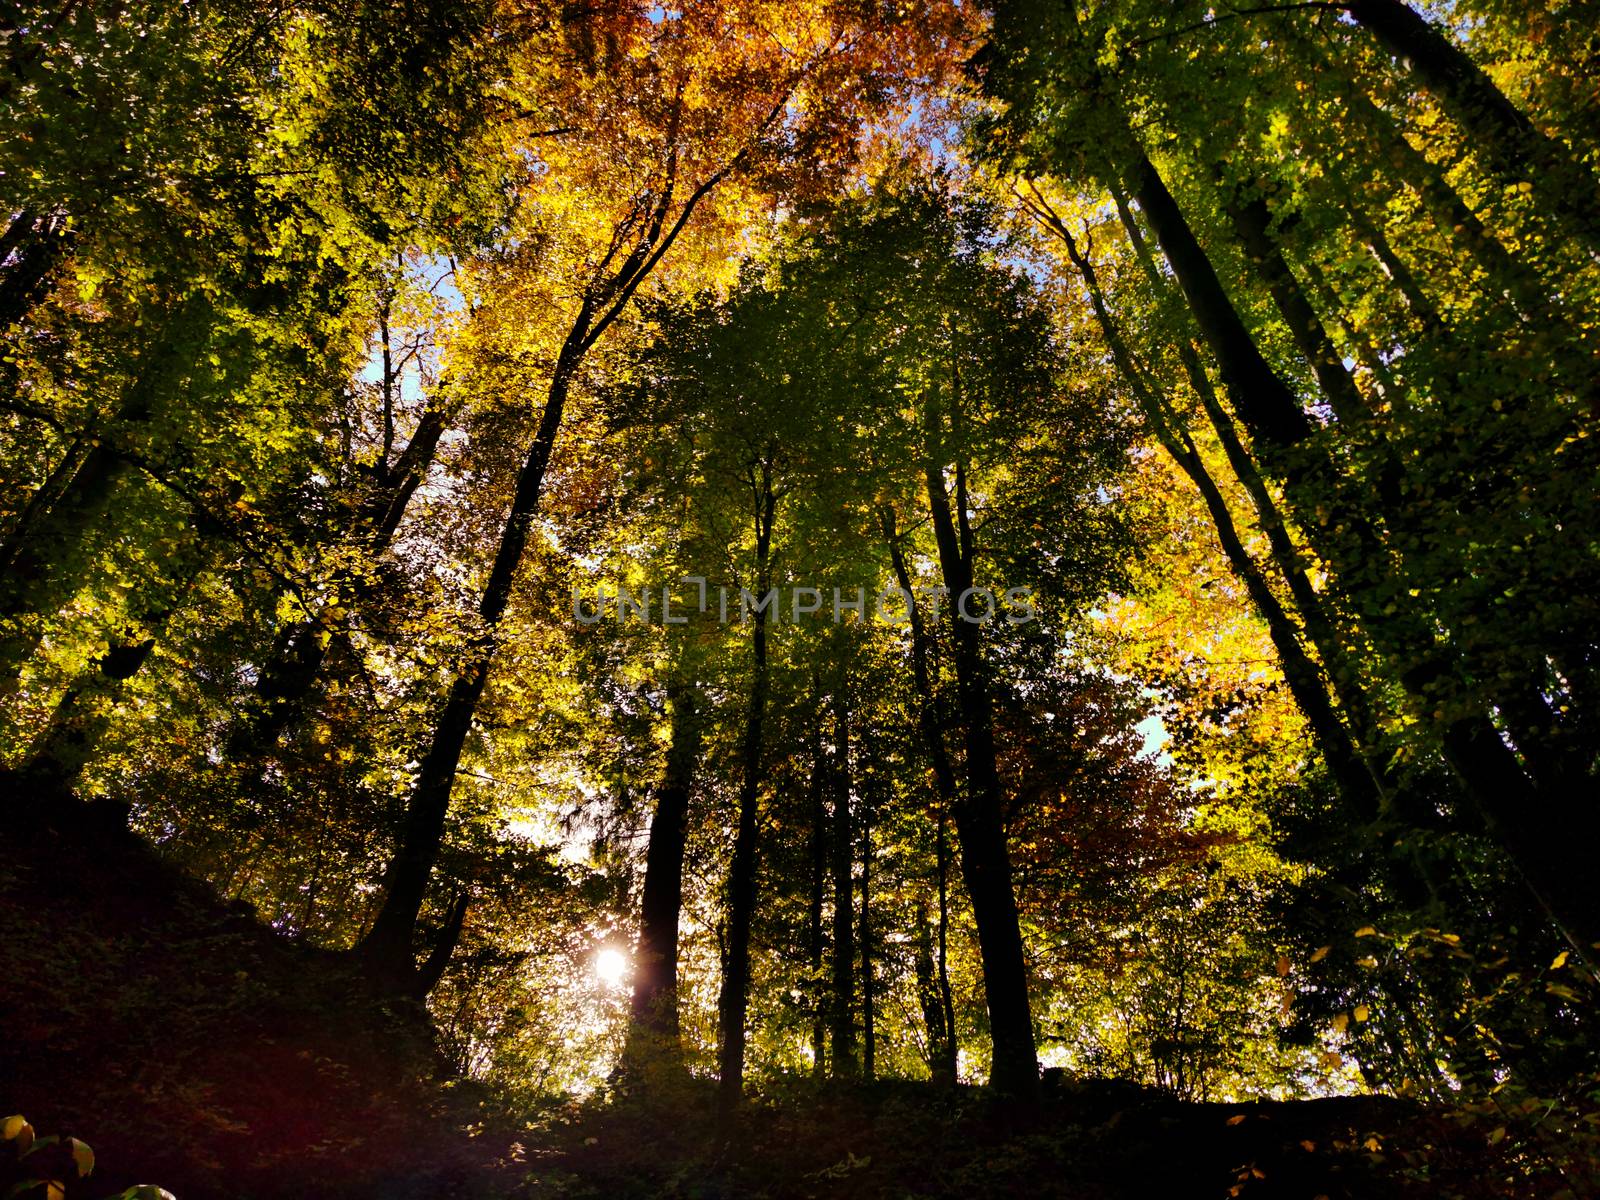 Autumn in the forest with sun rays. Green, orange and yellow leafs in autumn time in a Swiss forrest by PeterHofstetter